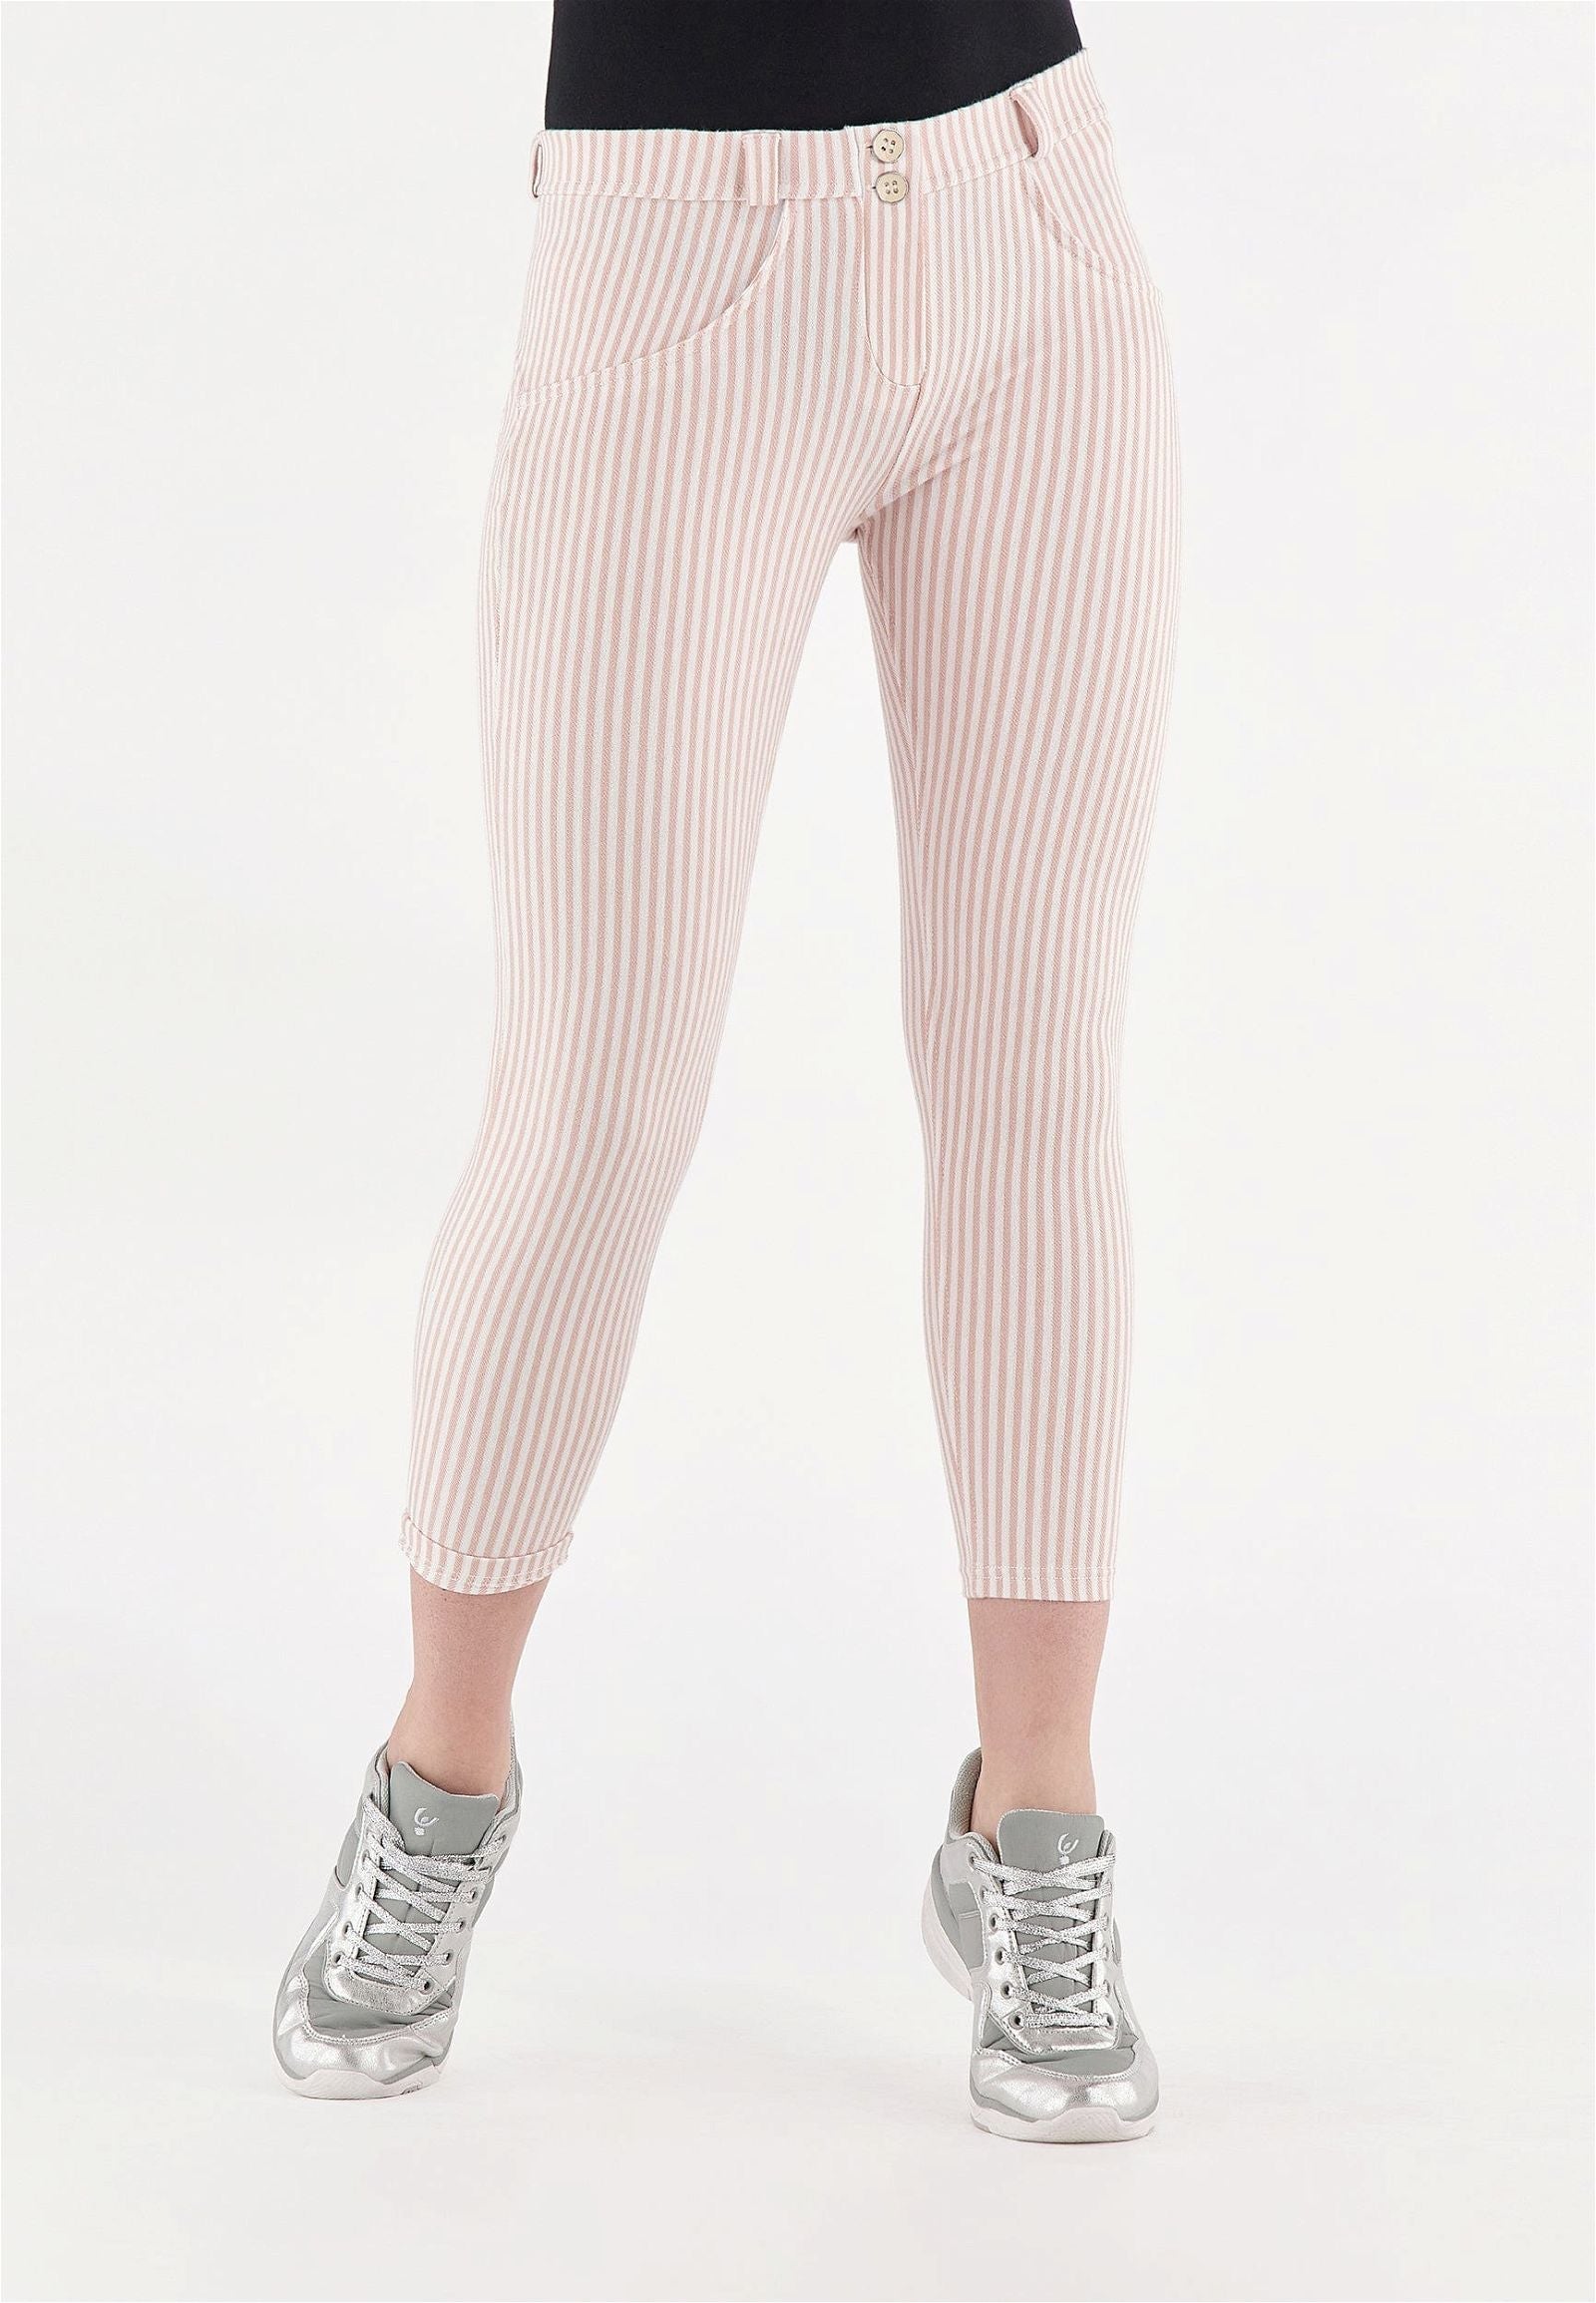 WR.UP® Fashion - Mid Rise - 7/8 Length - Pink + White Stripes 2